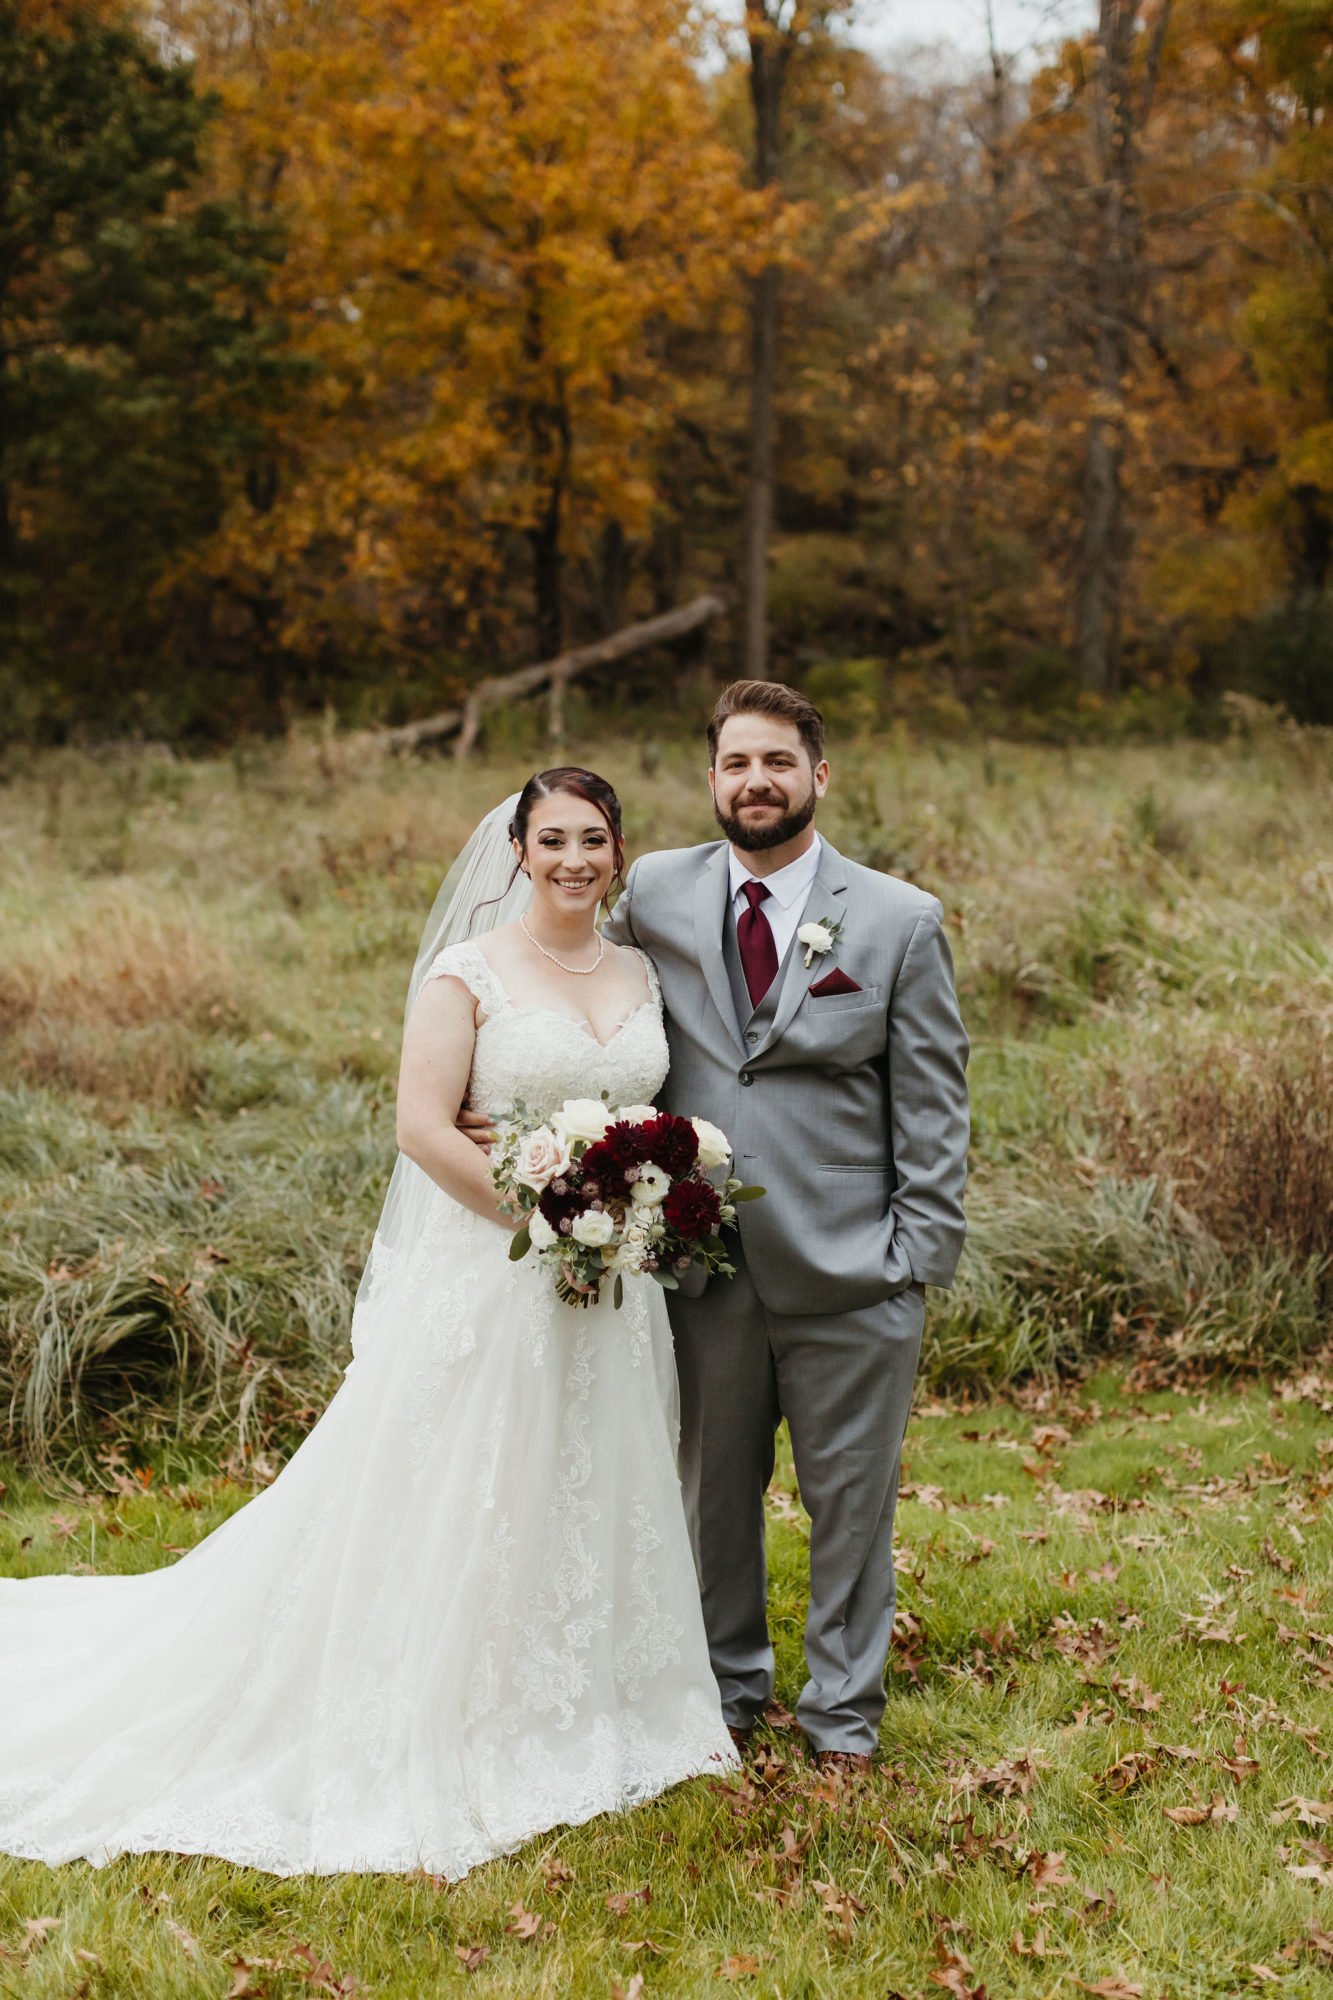 white Boutonnière, fall wedding, burgundy and green wedding, hudson valley wedding photographer, romantic rustic wedding, romantic fall wedding, wedding shoes, outdoor ceremony, couples photos, wedding portraits 